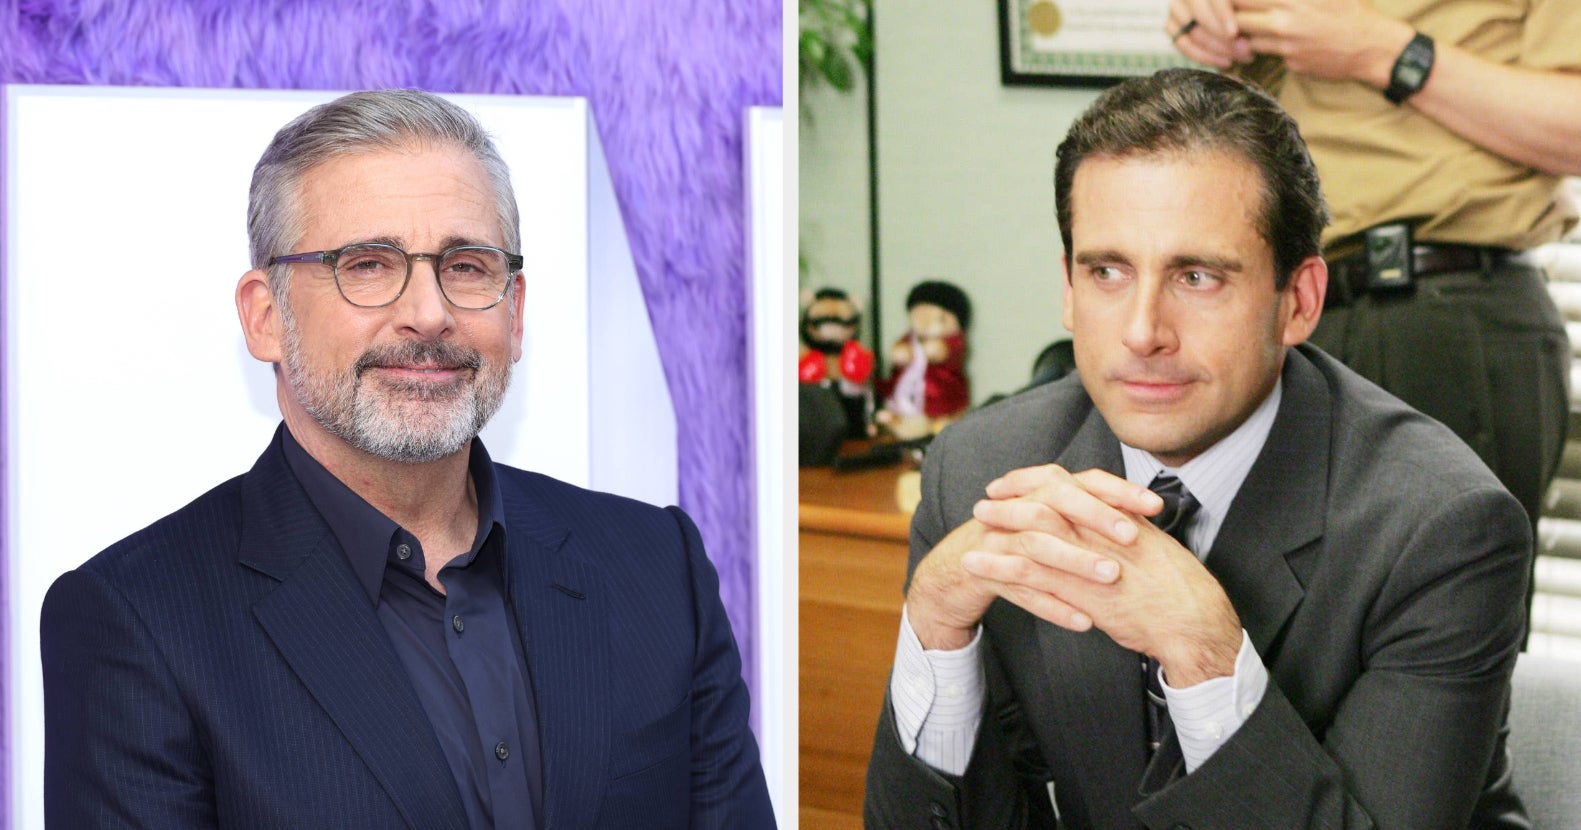 Steve Carell Just Revealed Why He "Will Not Be Showing Up" In The New "The Office" Series